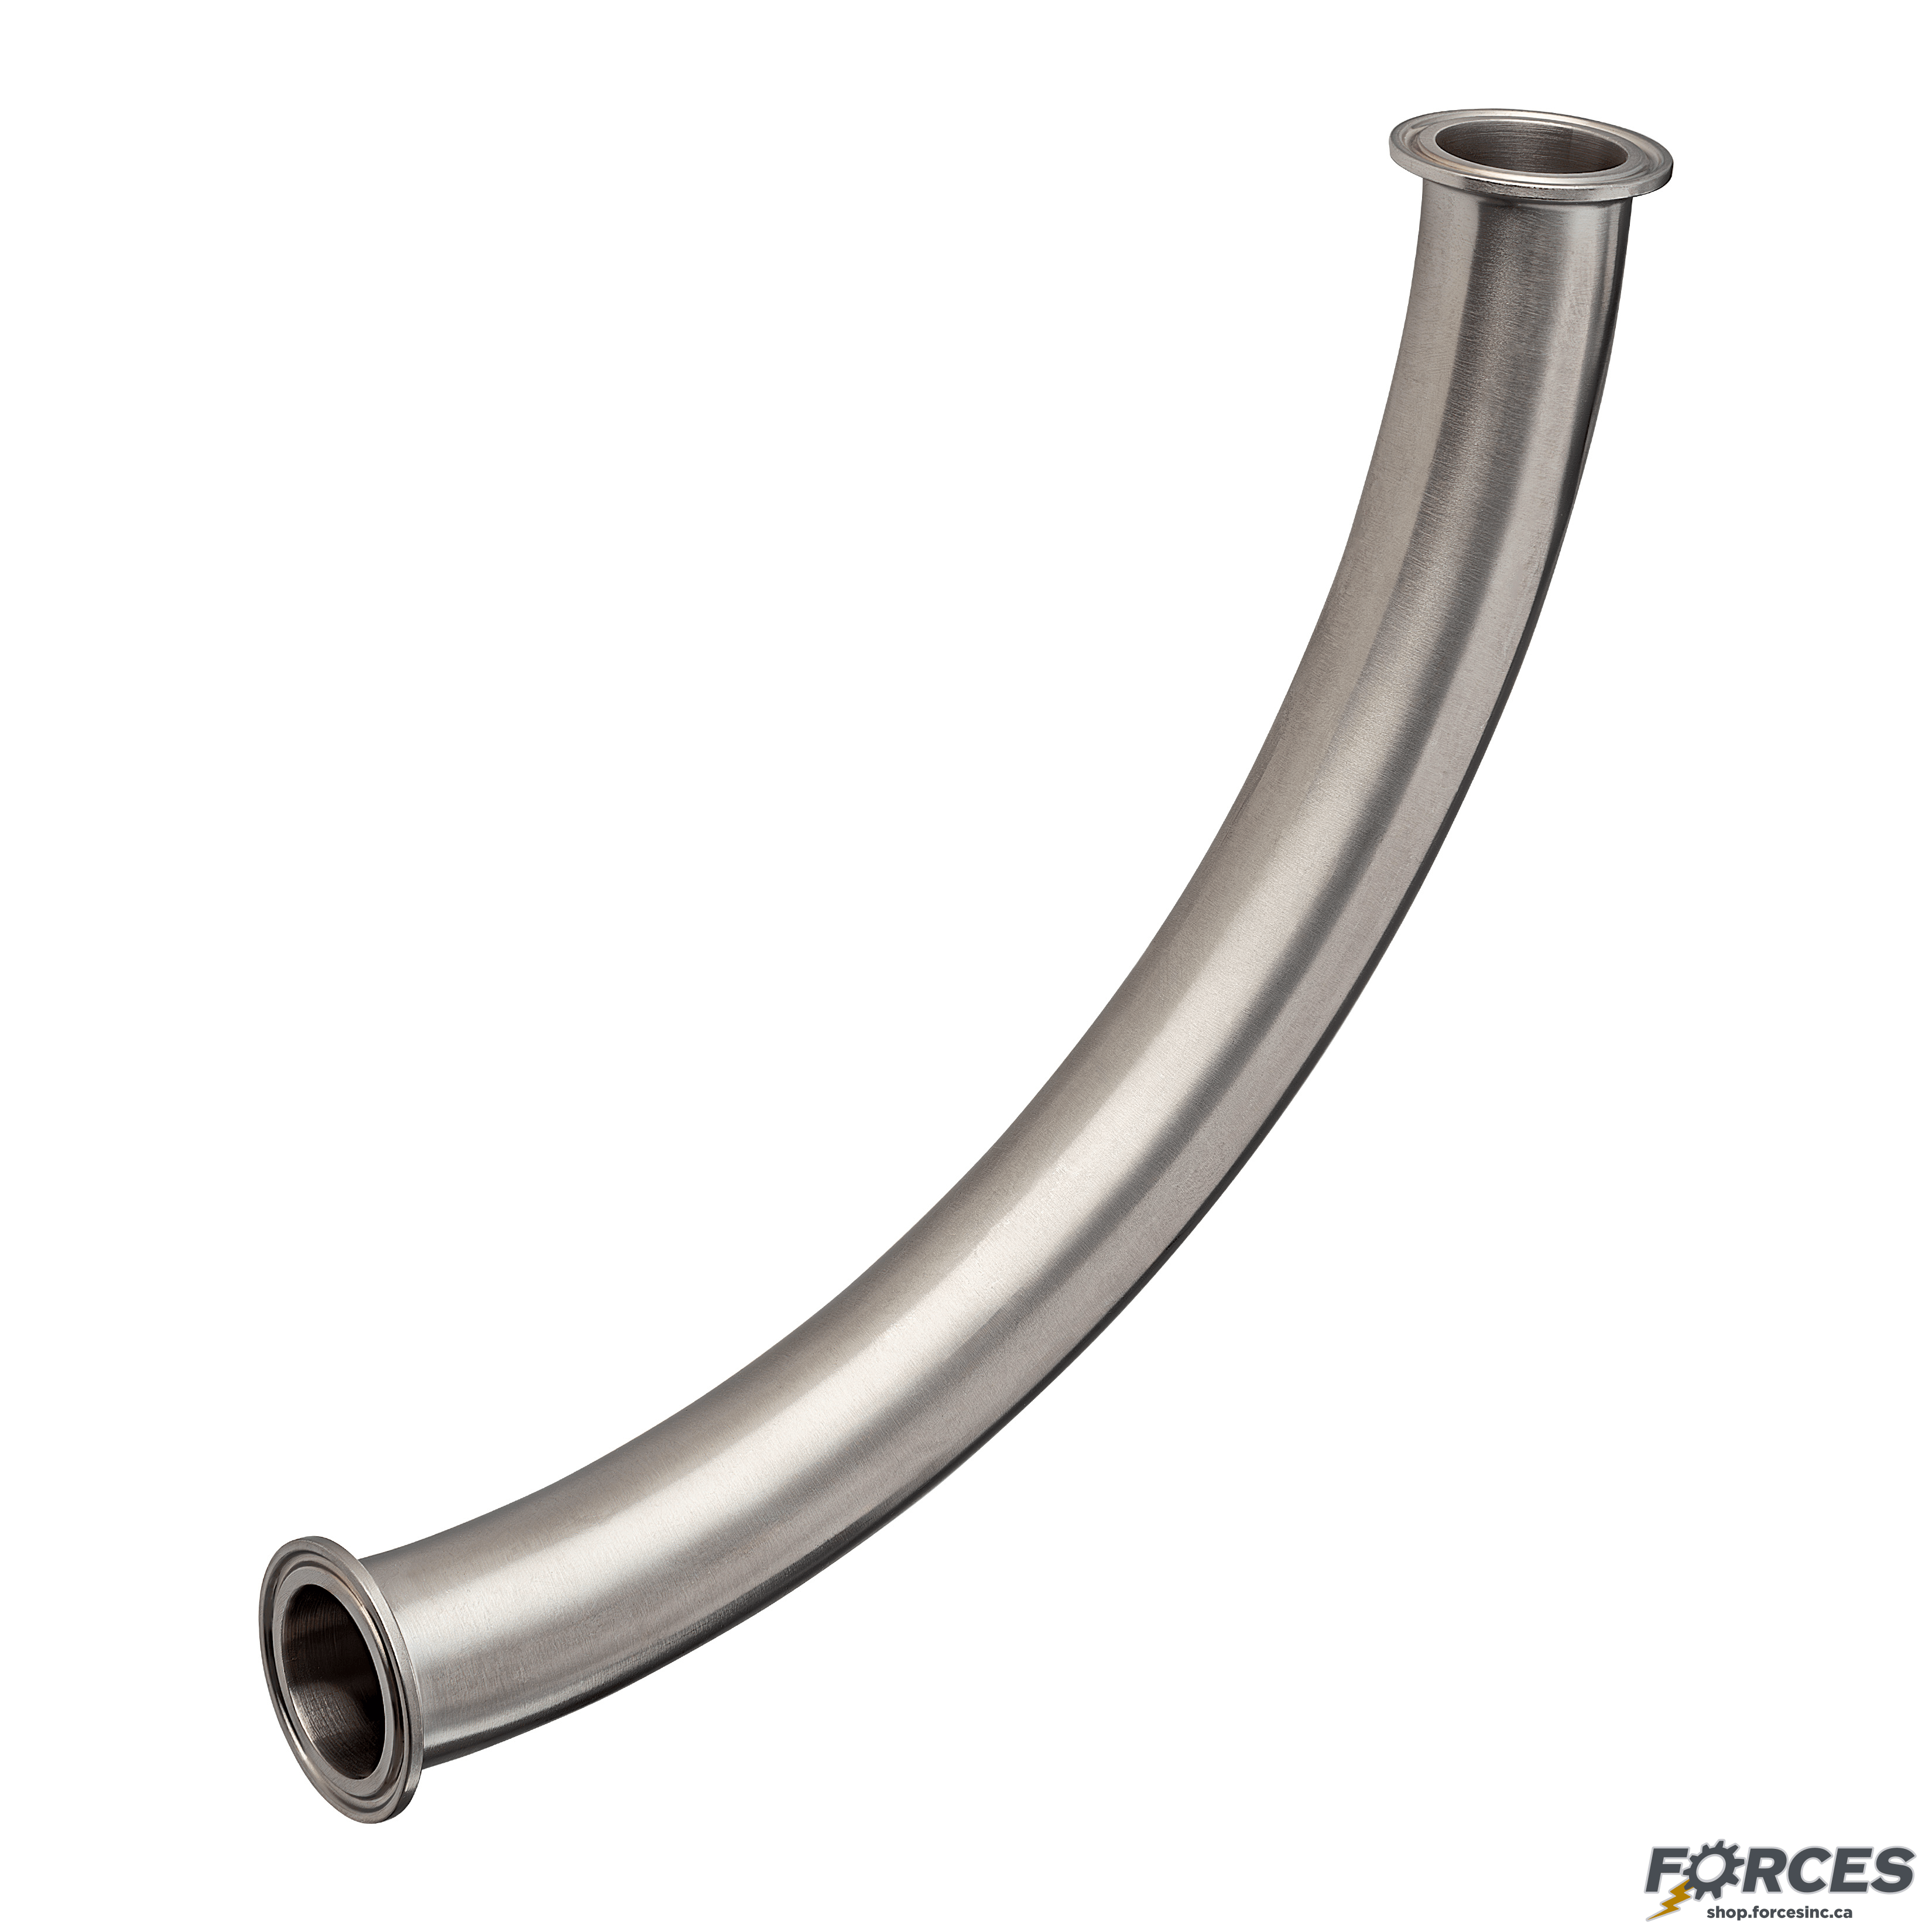 1-1/2" x 12" Tri-Clamp 90° Elbow Long Radius - Stainless Steel 304 - Forces Inc